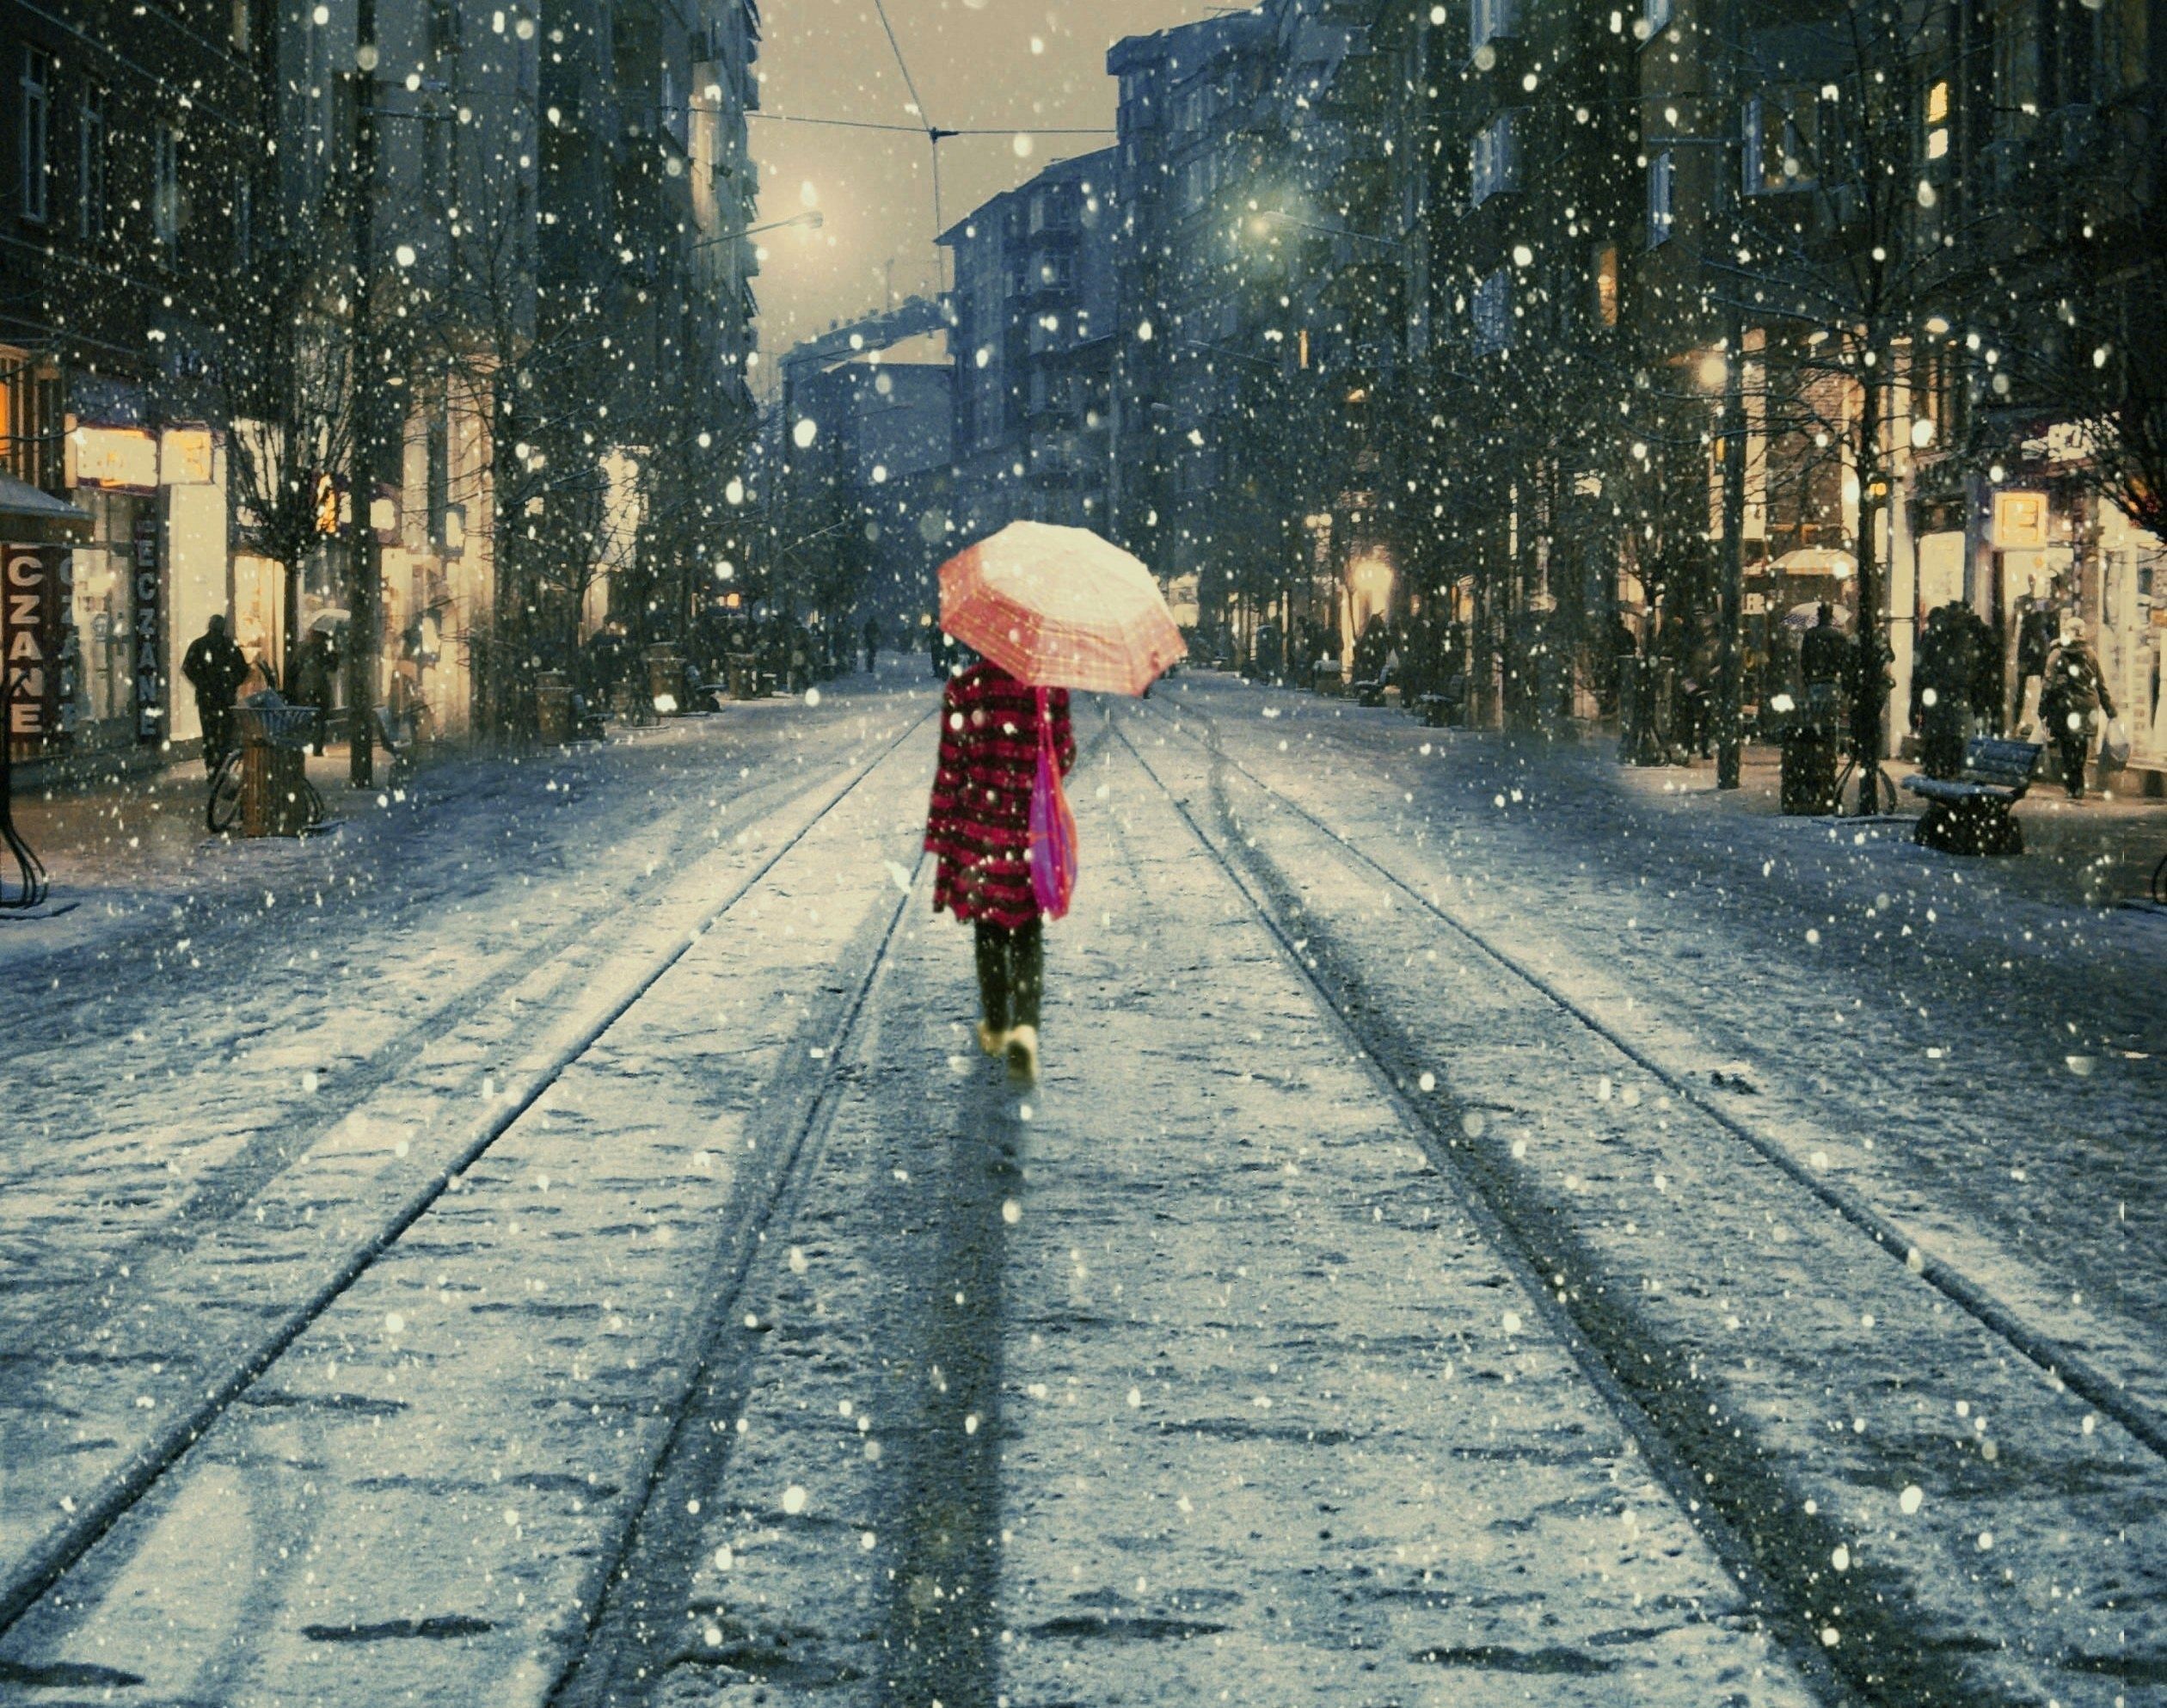 people in the snow. the snow, street, people, city Desktop Wallpaper and Background. Dreamy photography, Winter wonder, Snow